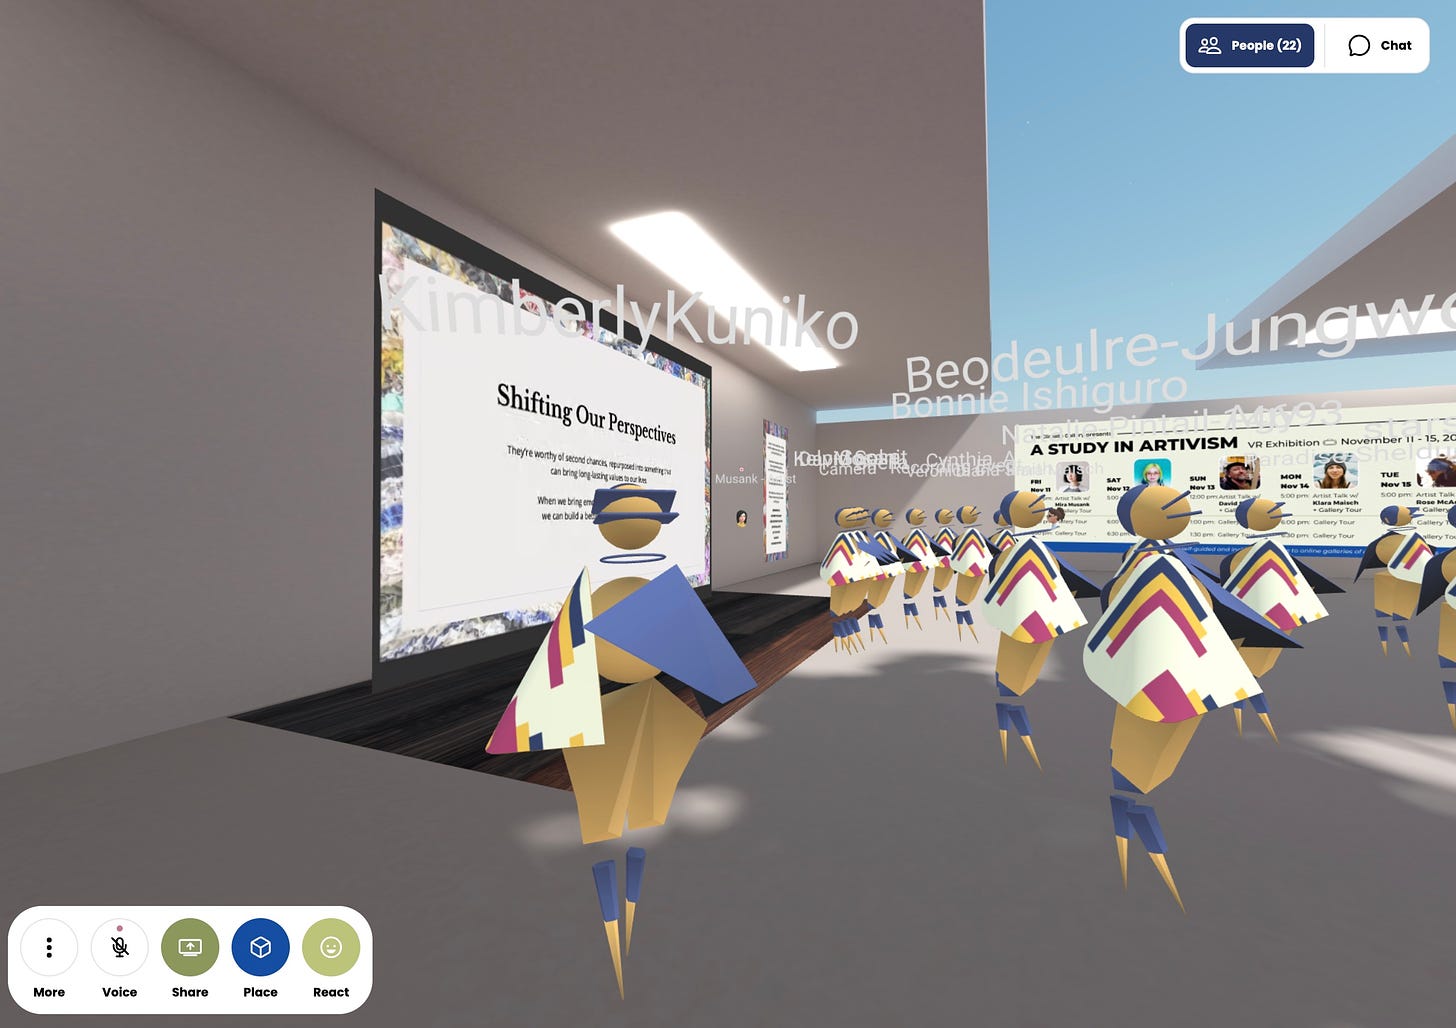 Mira doing her presentation in the virtual Climate Gallery Hub space in front of dozens of people in avatar forms.